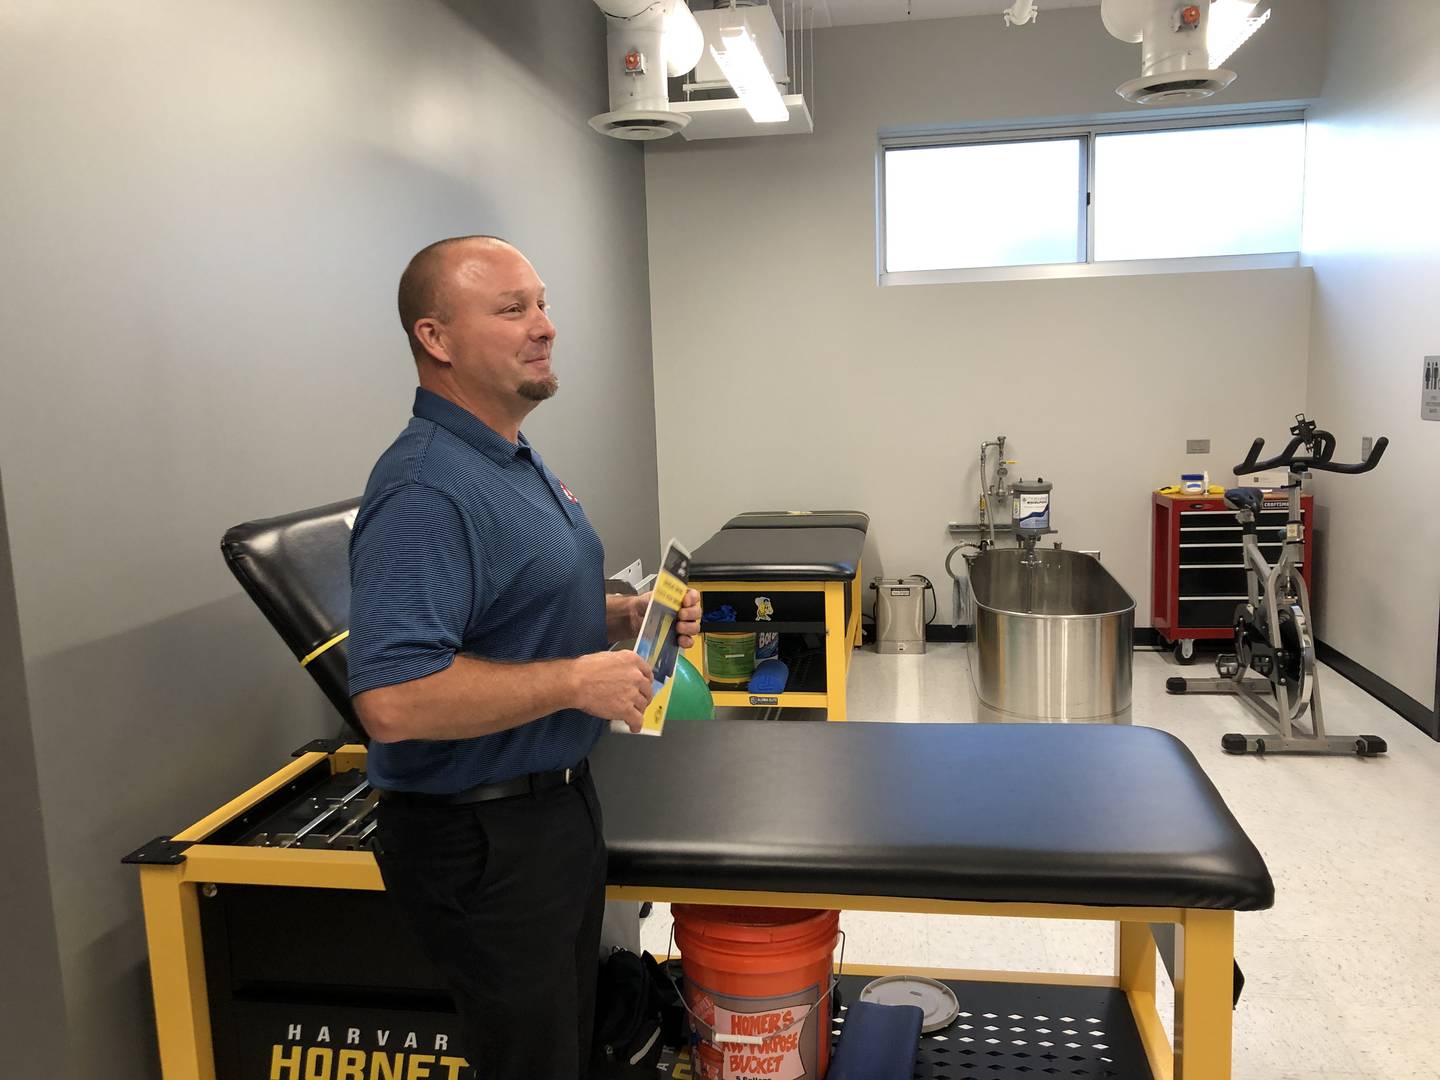 Jay Schaack, project manager from Lamp Construction, Inc., said on Aug. 9, 2022, there were some delays as they waited for equipment for the Harvard High School athletic training room.